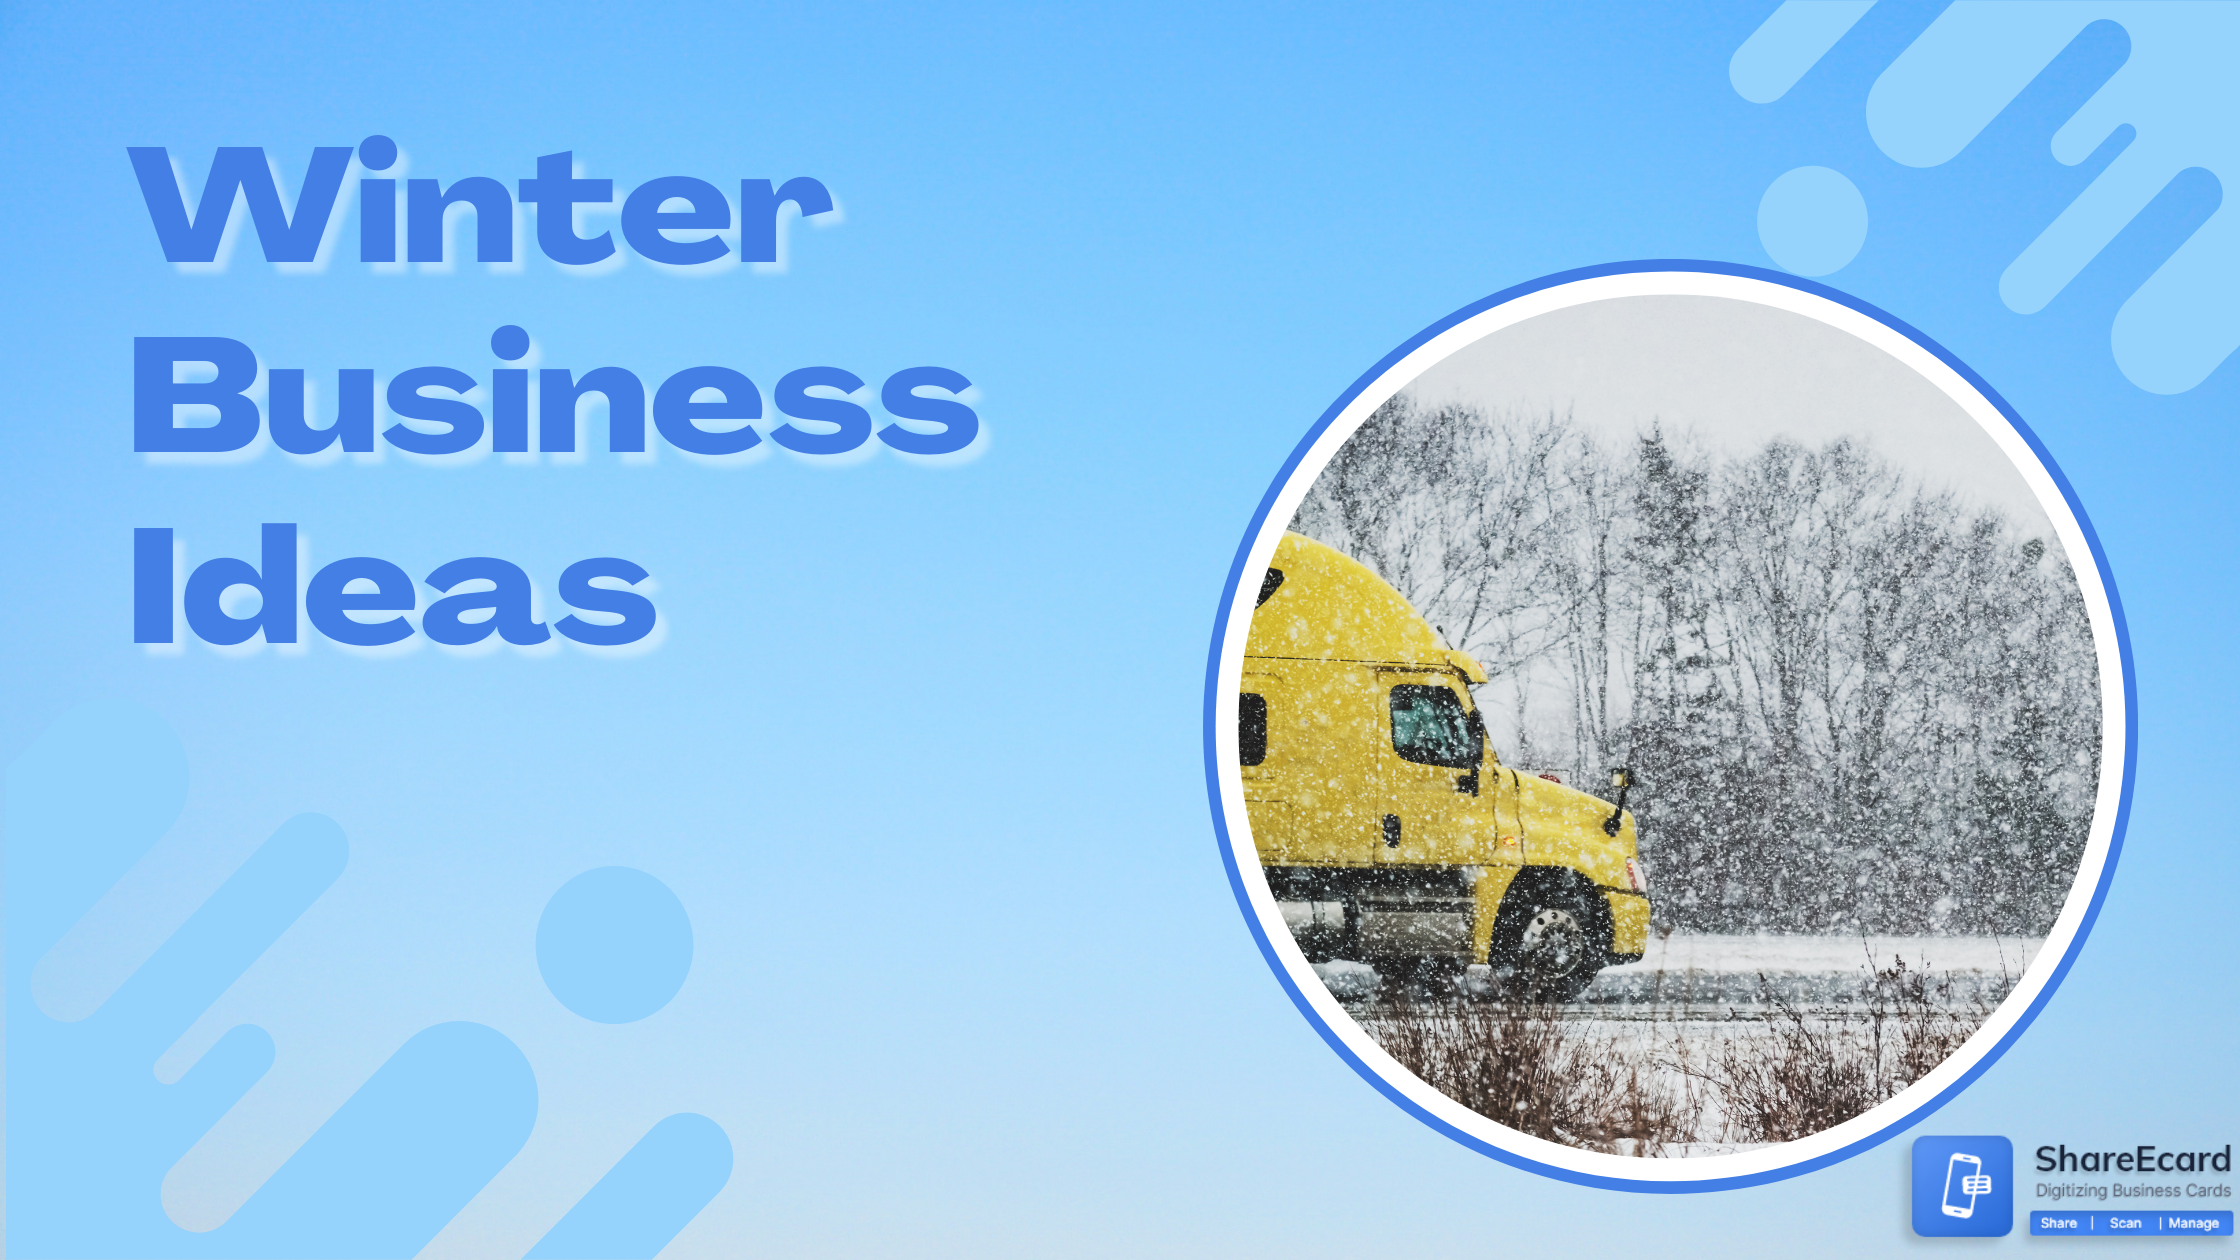 Winter Business Ideas for Small Business